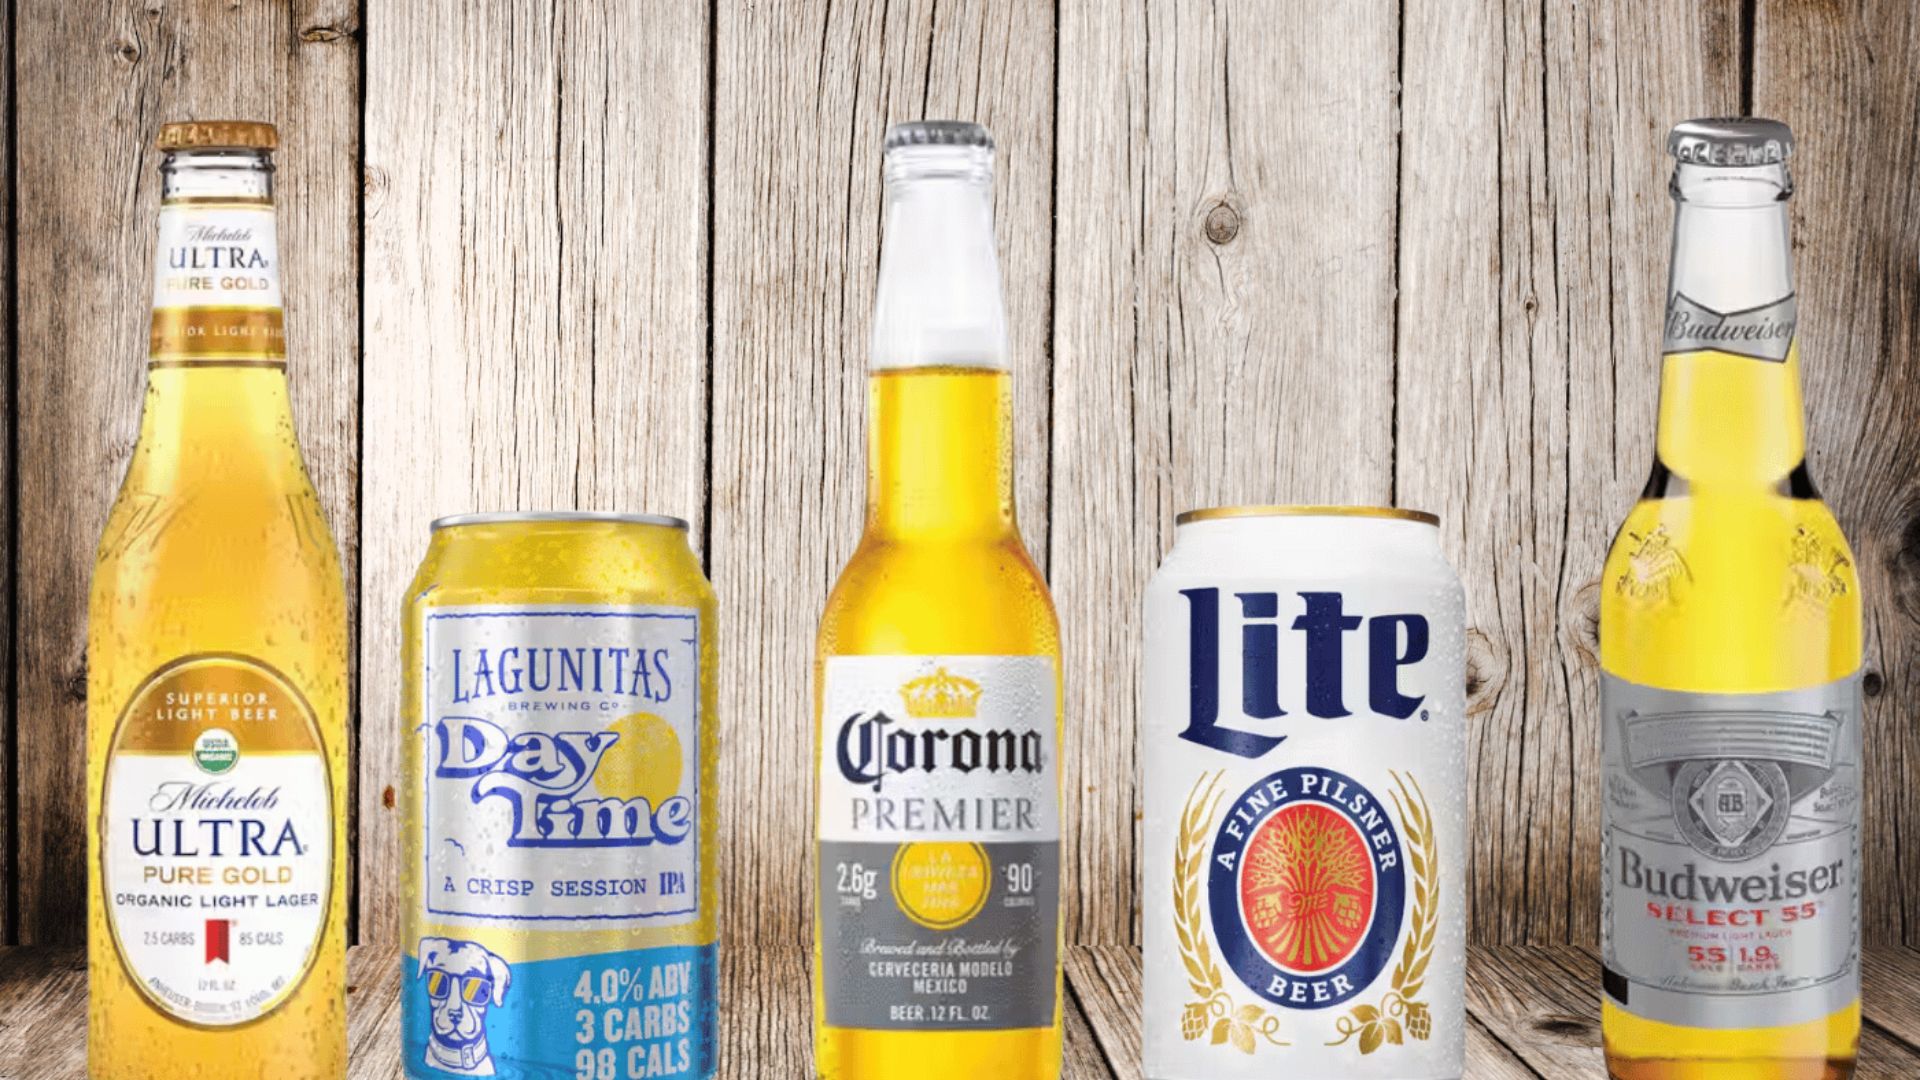 this image shows Low-Carb and Keto-Friendly Beers